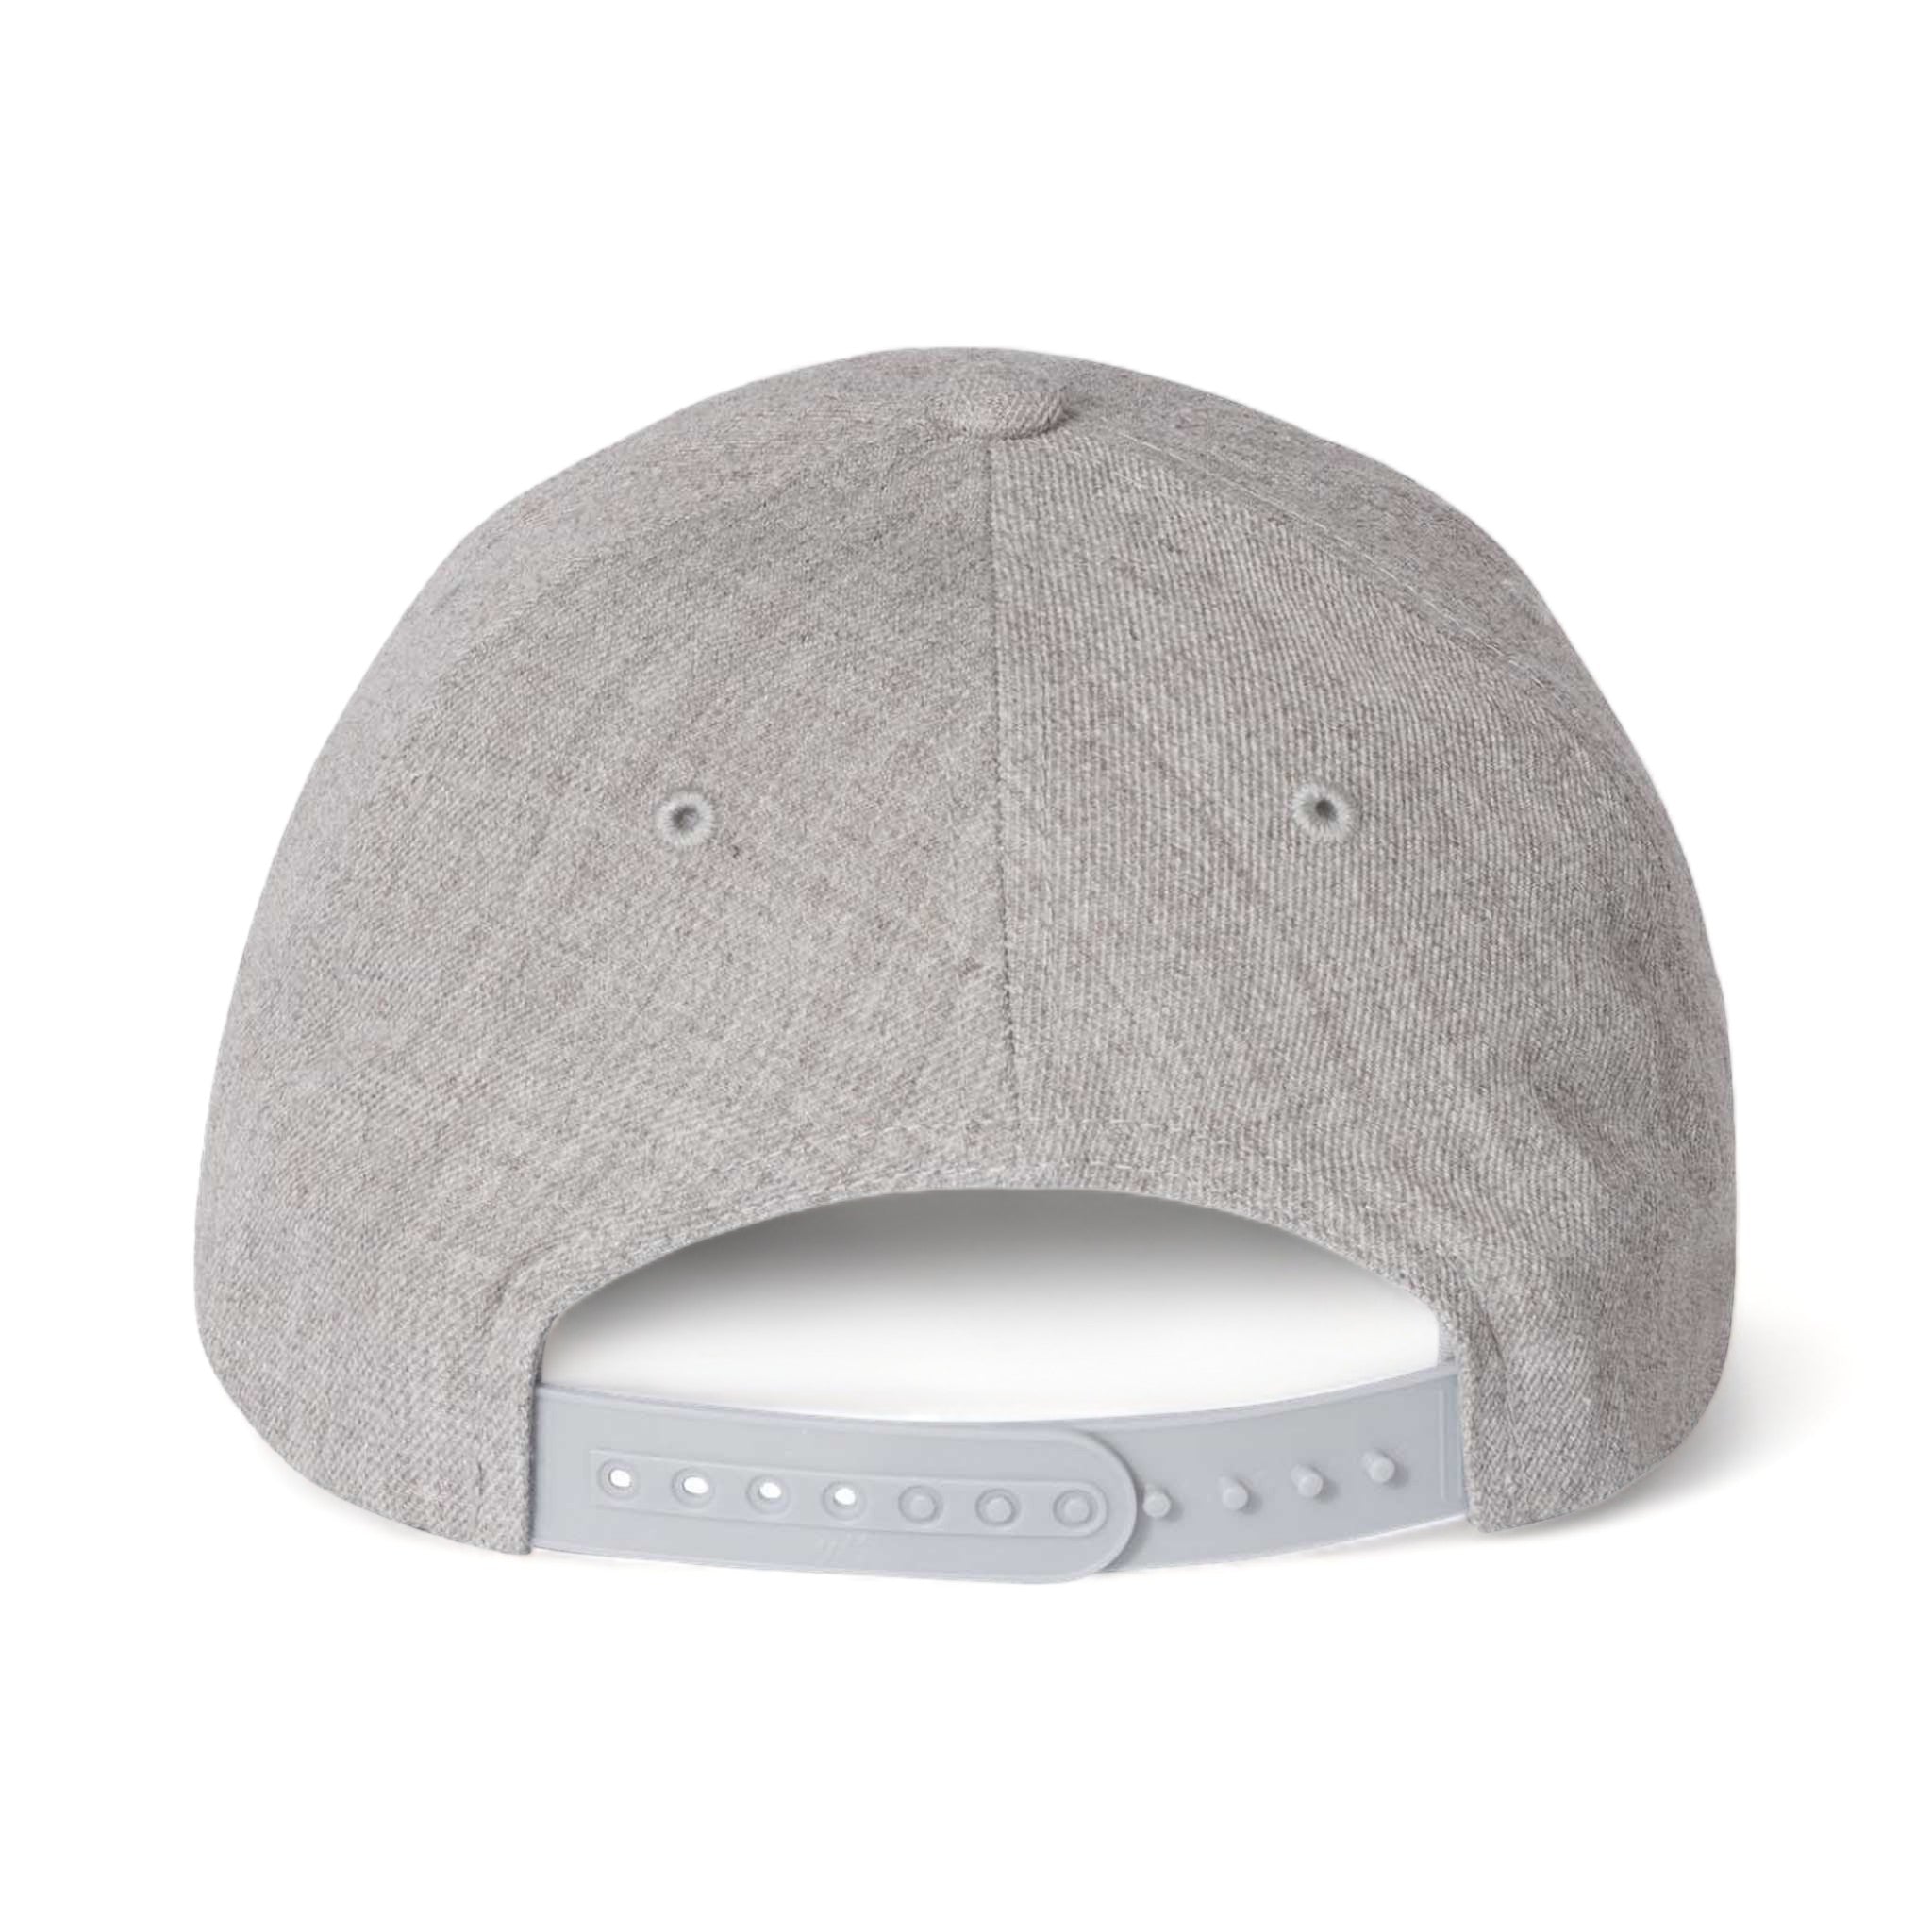 Back view of YP Classics 6789M custom hat in heather grey